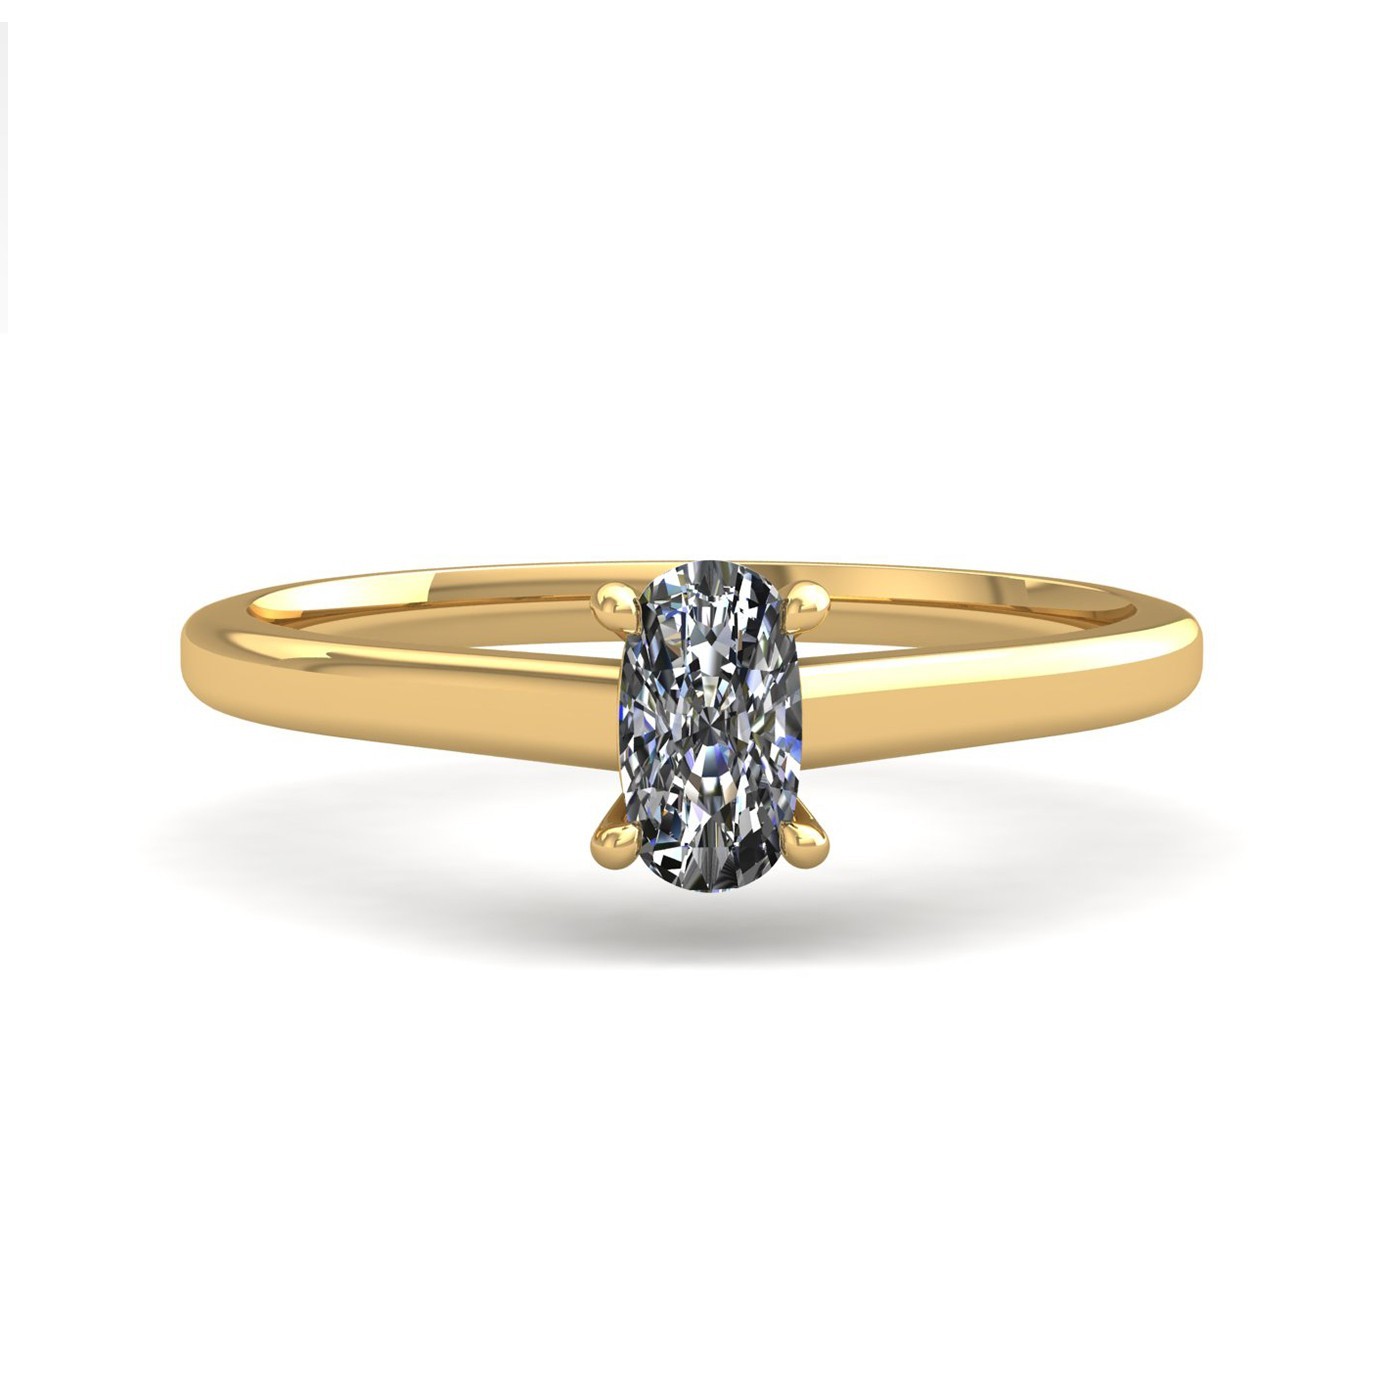 18k yellow gold  2.00 ct 4 prongs solitaire elongated cushion cut diamond engagement ring with whisper thin band Photos & images